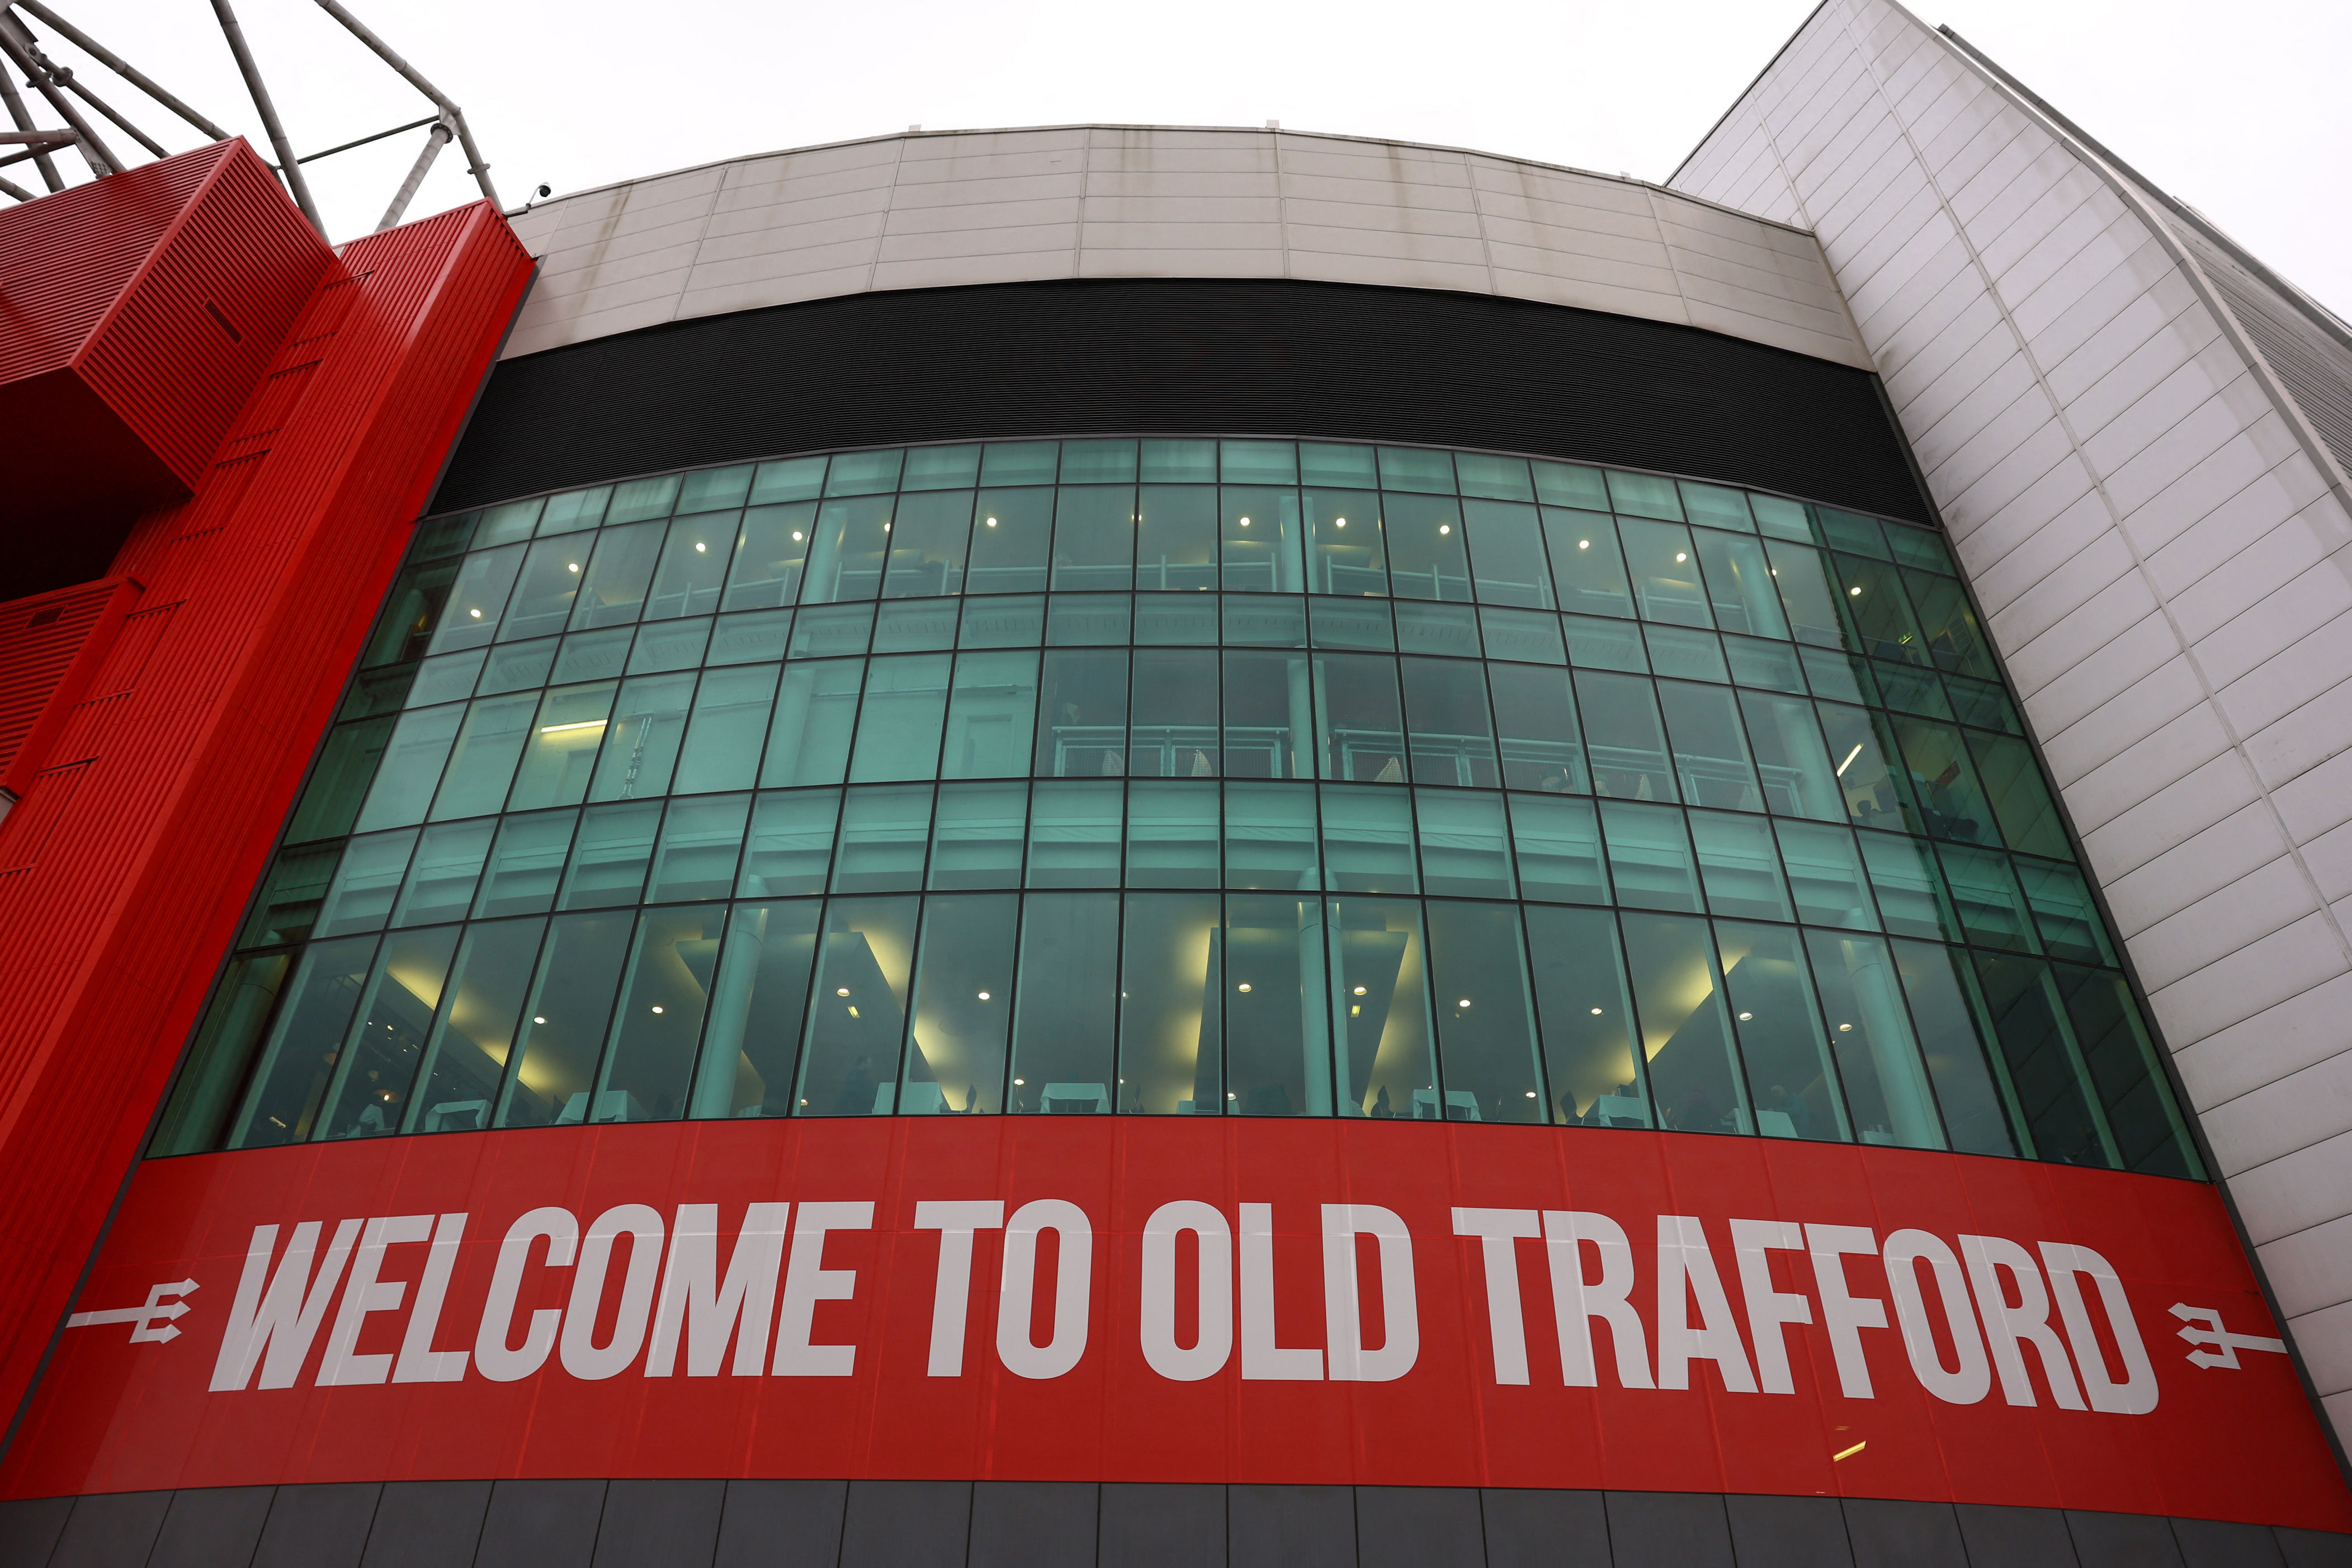 sir jim ratcliffe reveals manchester united plans to build ‘100,000-seater’ old trafford